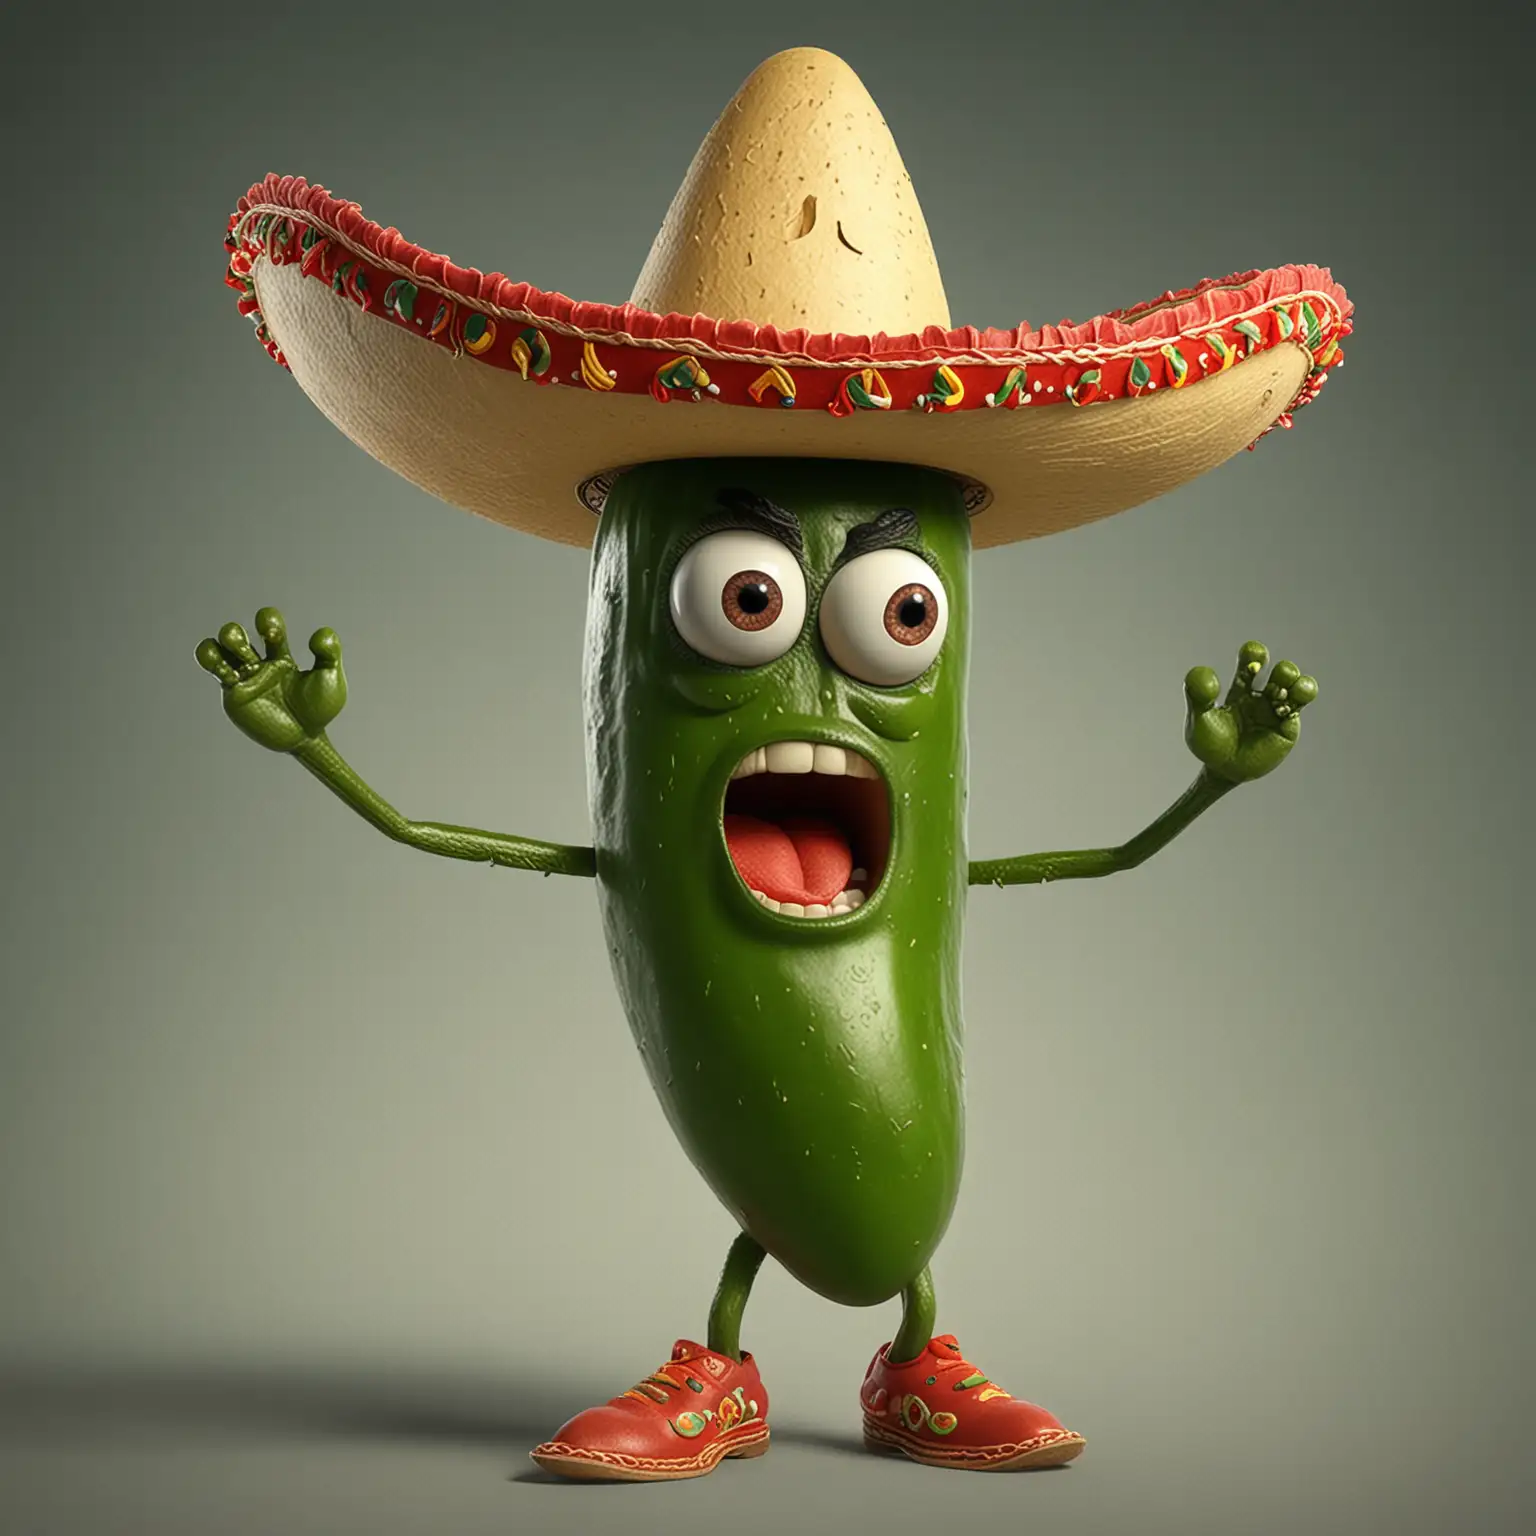 Fiery Jalapeo Character Expressing Anger in a Sombrero